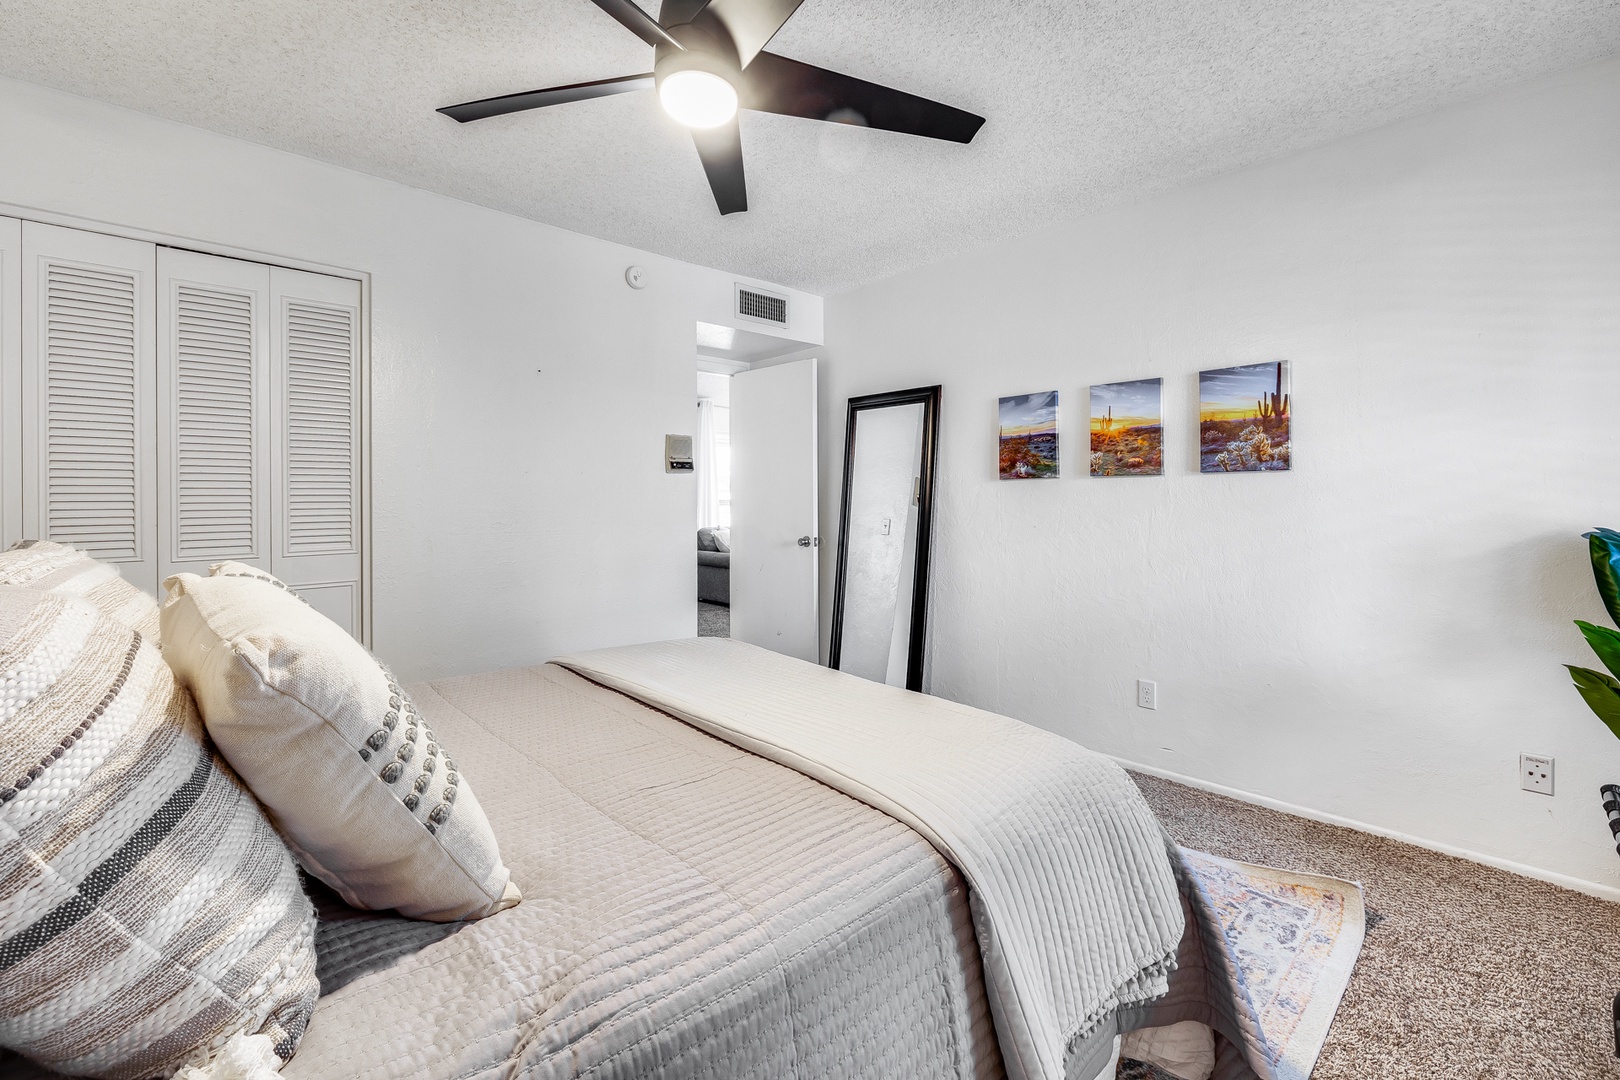 Glendale Vacation Rentals, Condo at the Bell Air - Enough space to sleep 2 guests and a standard closet to store your belongings